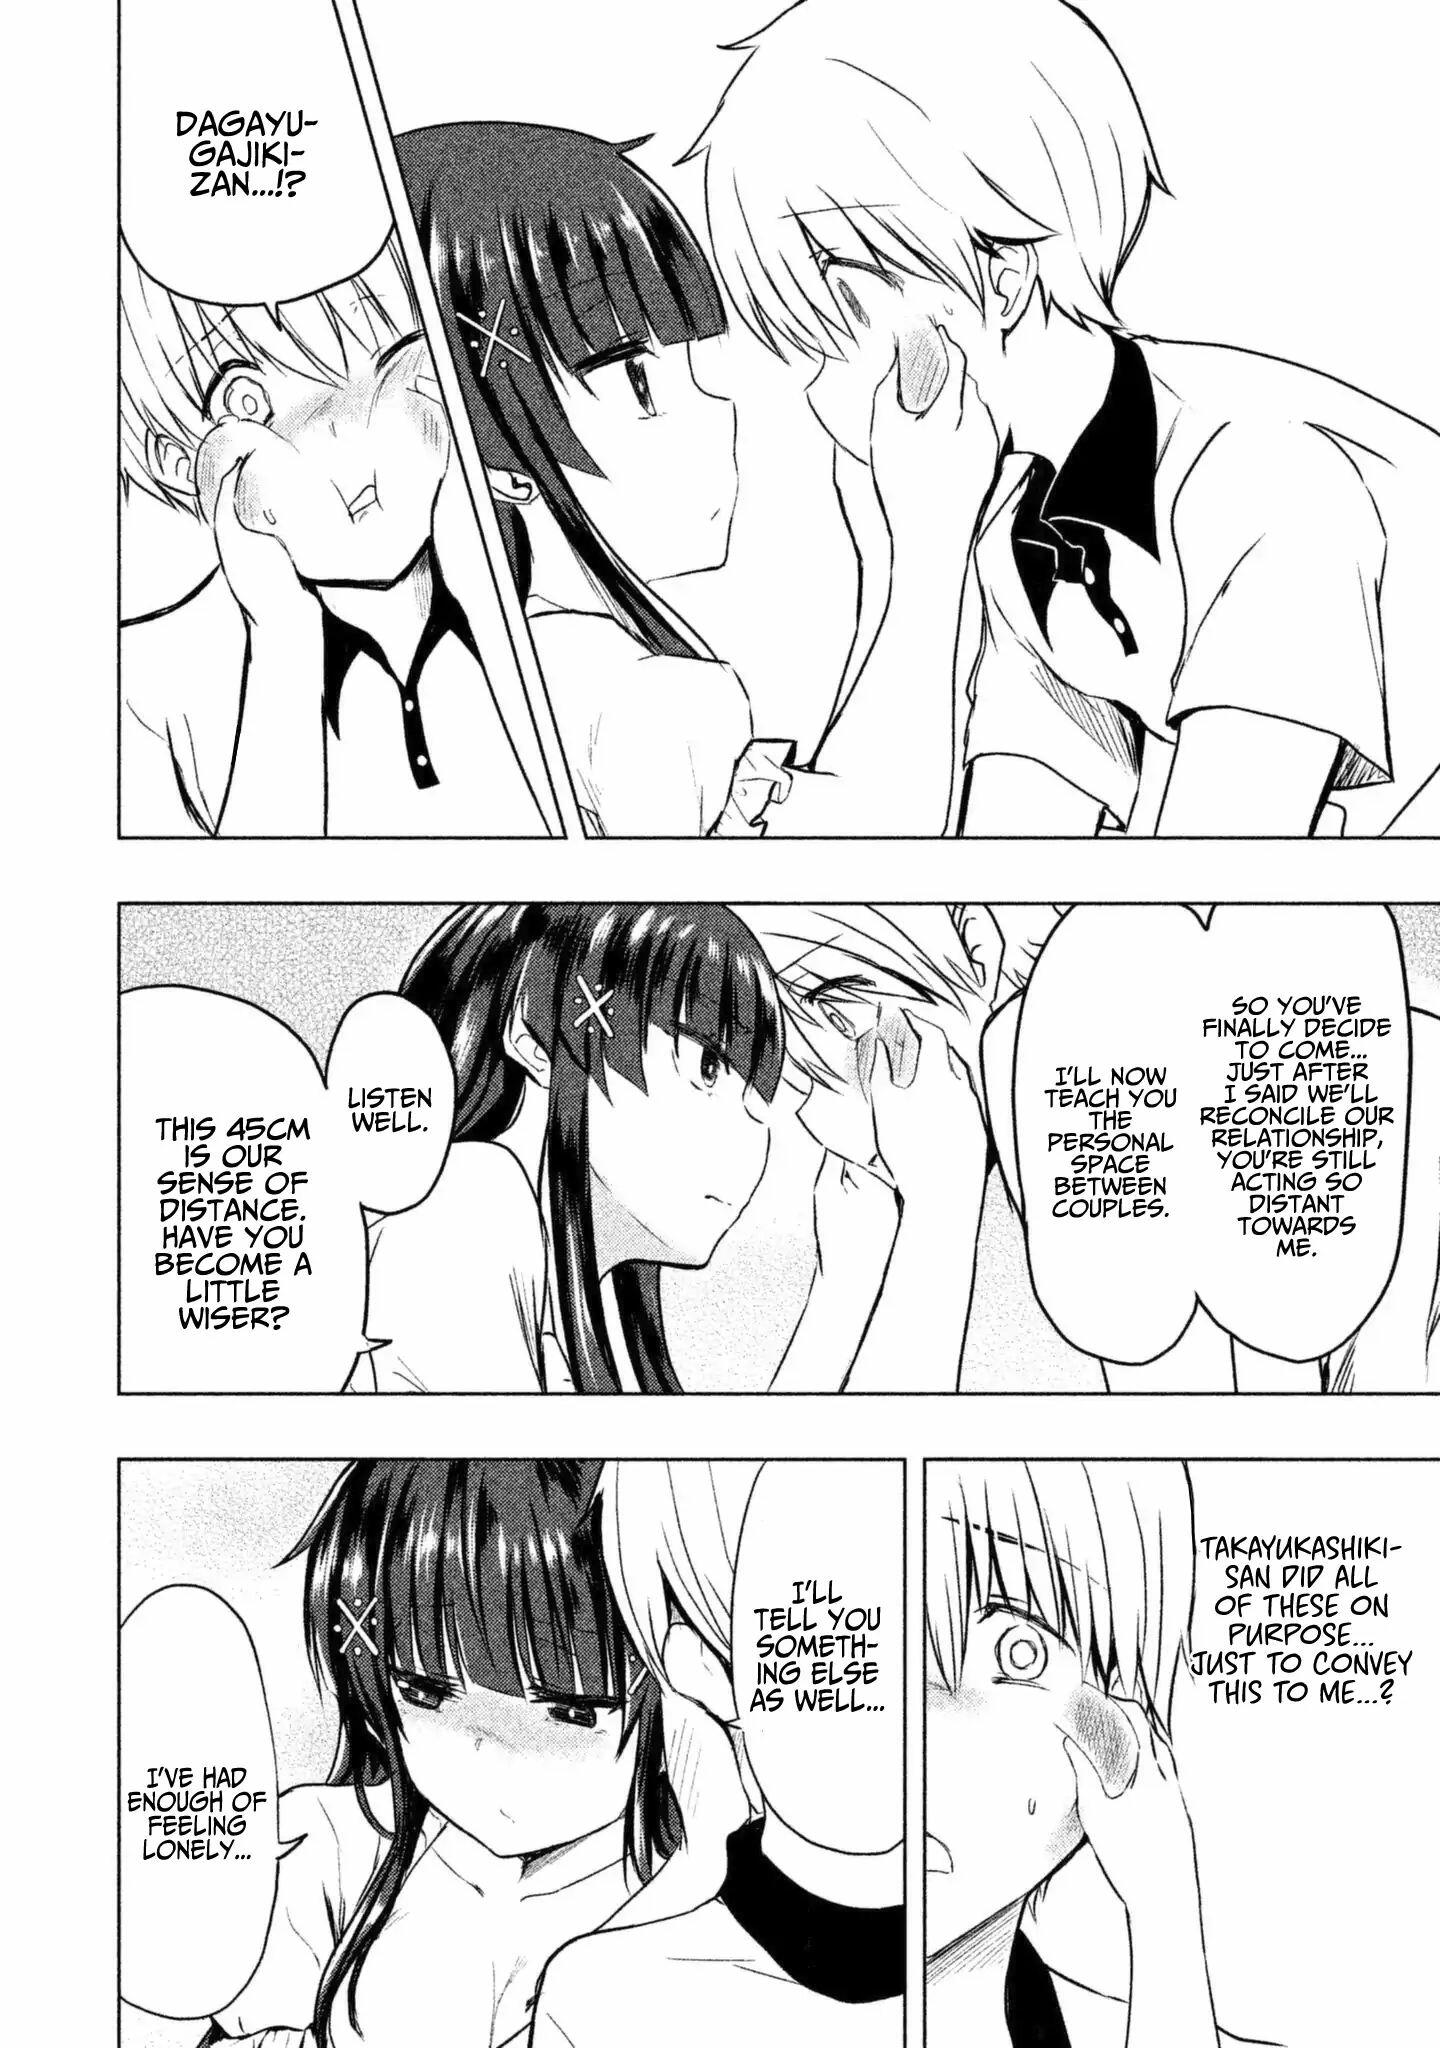 A Girl Who Is Very Well-Informed About Weird Knowledge, Takayukashiki Souko-San Vol.1 Chapter 8: Distance page 7 - Mangakakalots.com